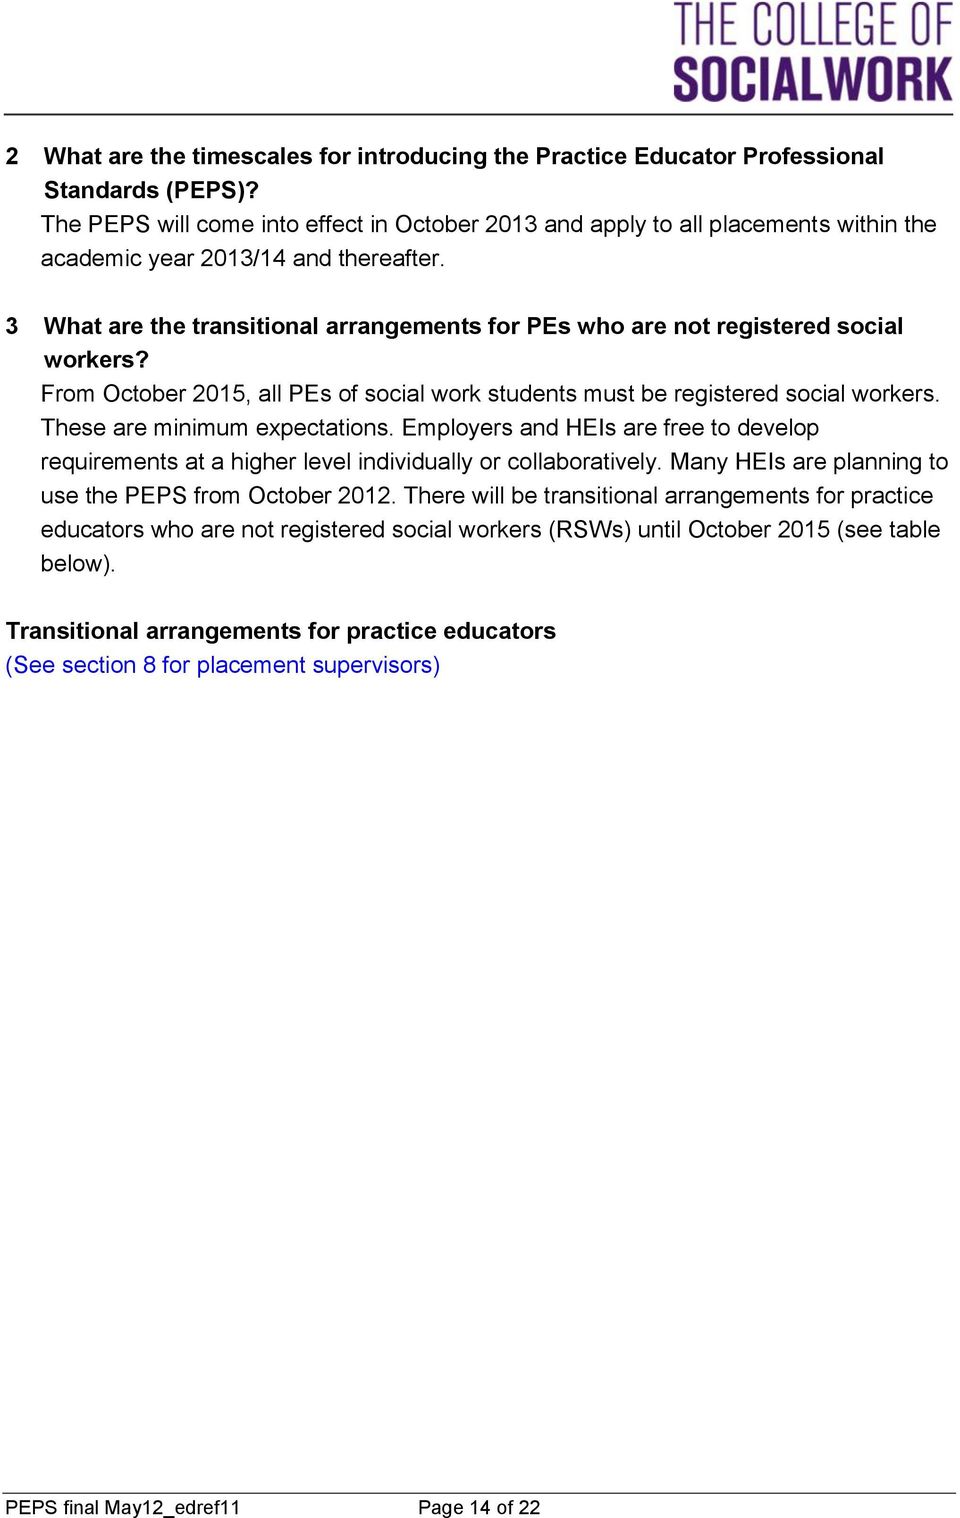 3 What are the transitional arrangements for PEs who are not registered social workers? From October 2015, all PEs of social work students must be registered social workers.